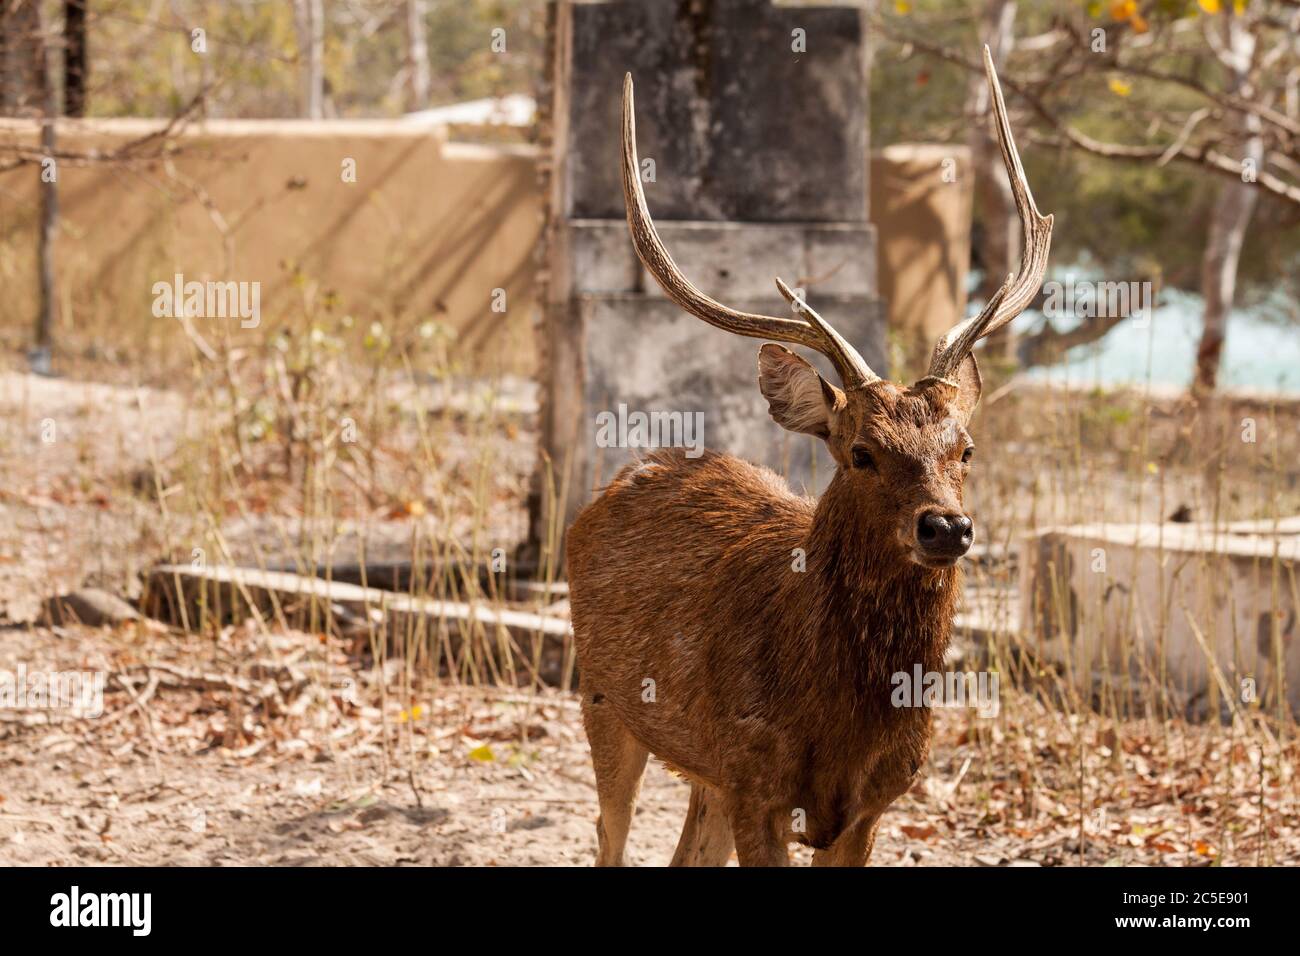 Wild male deer looking at the camera Stock Photo